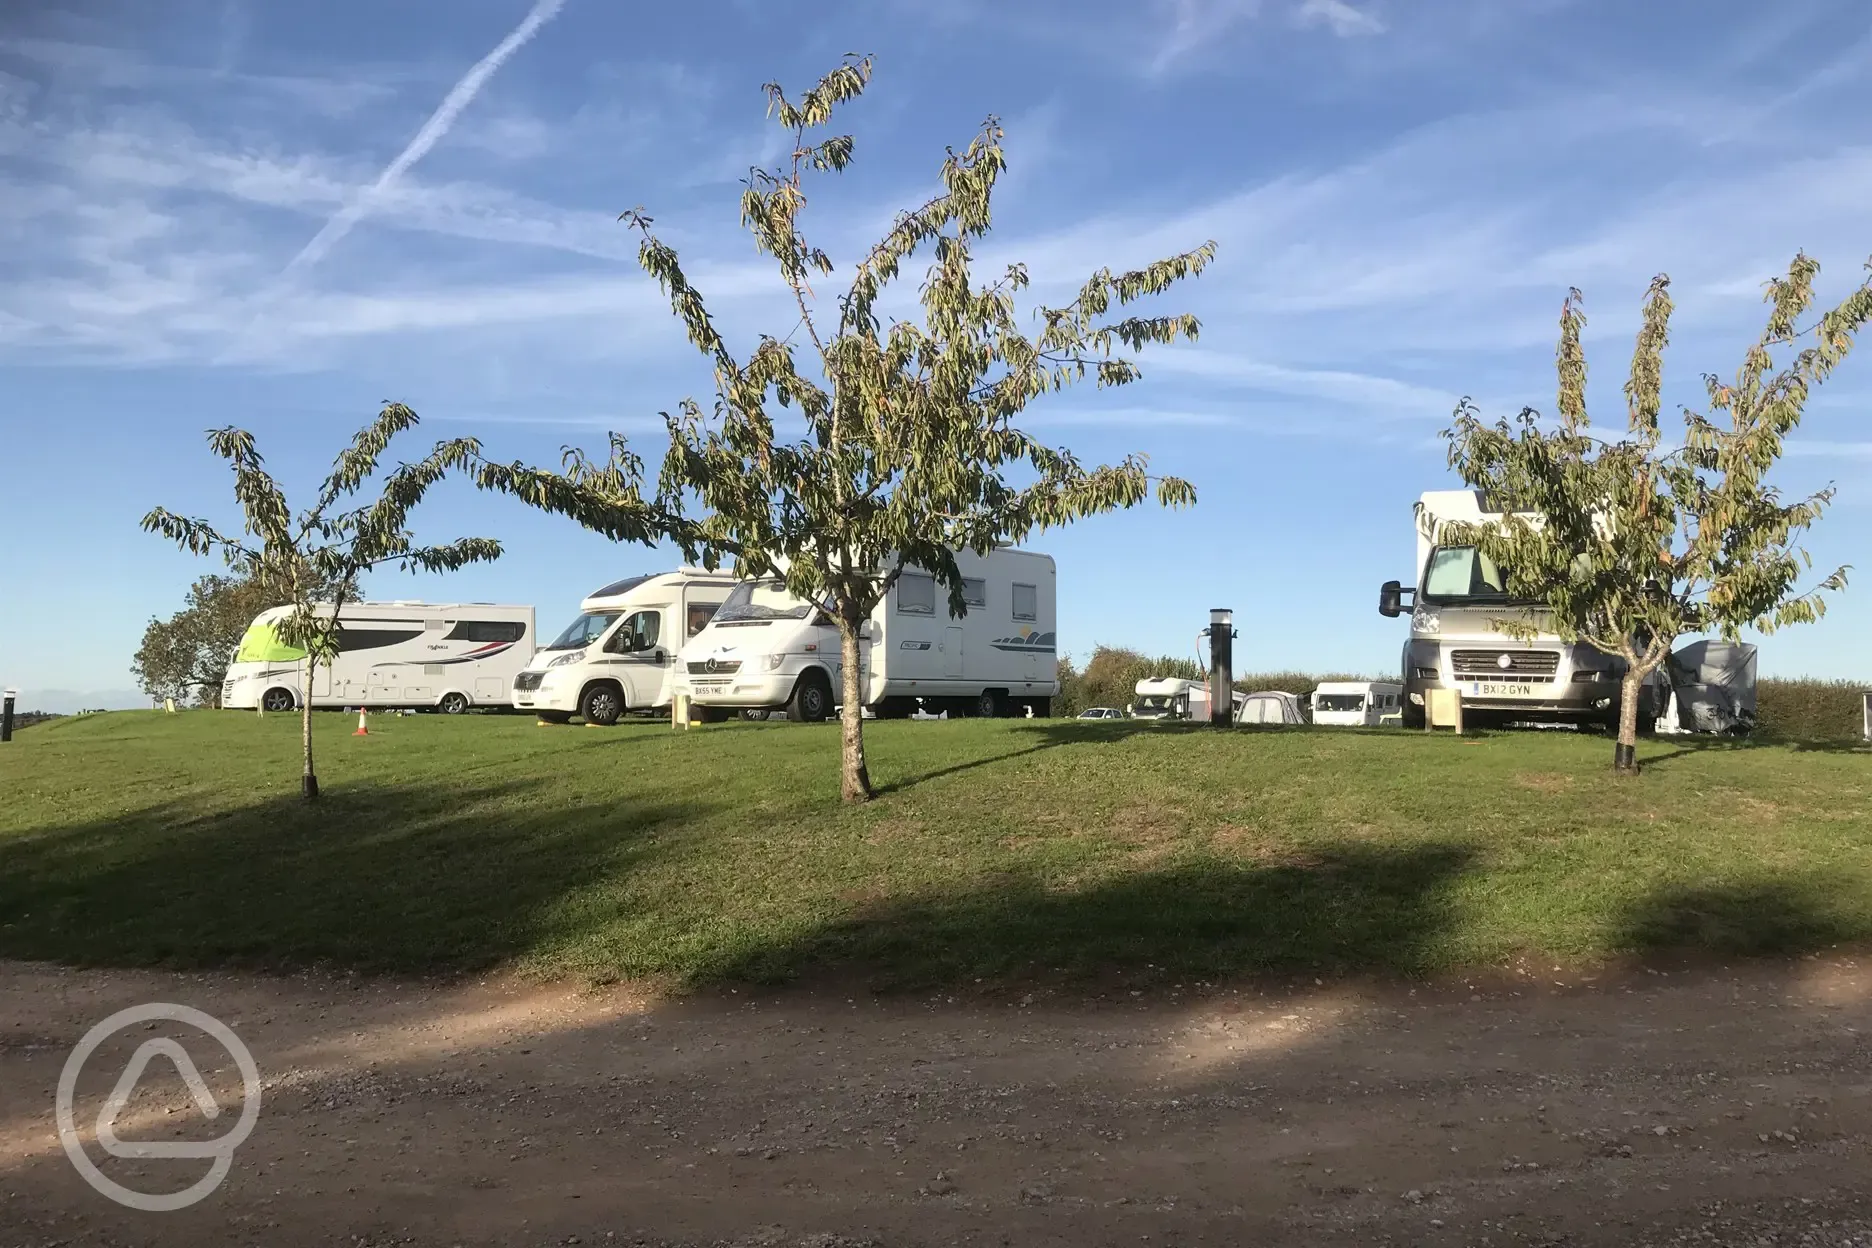 Some of our touring pitches